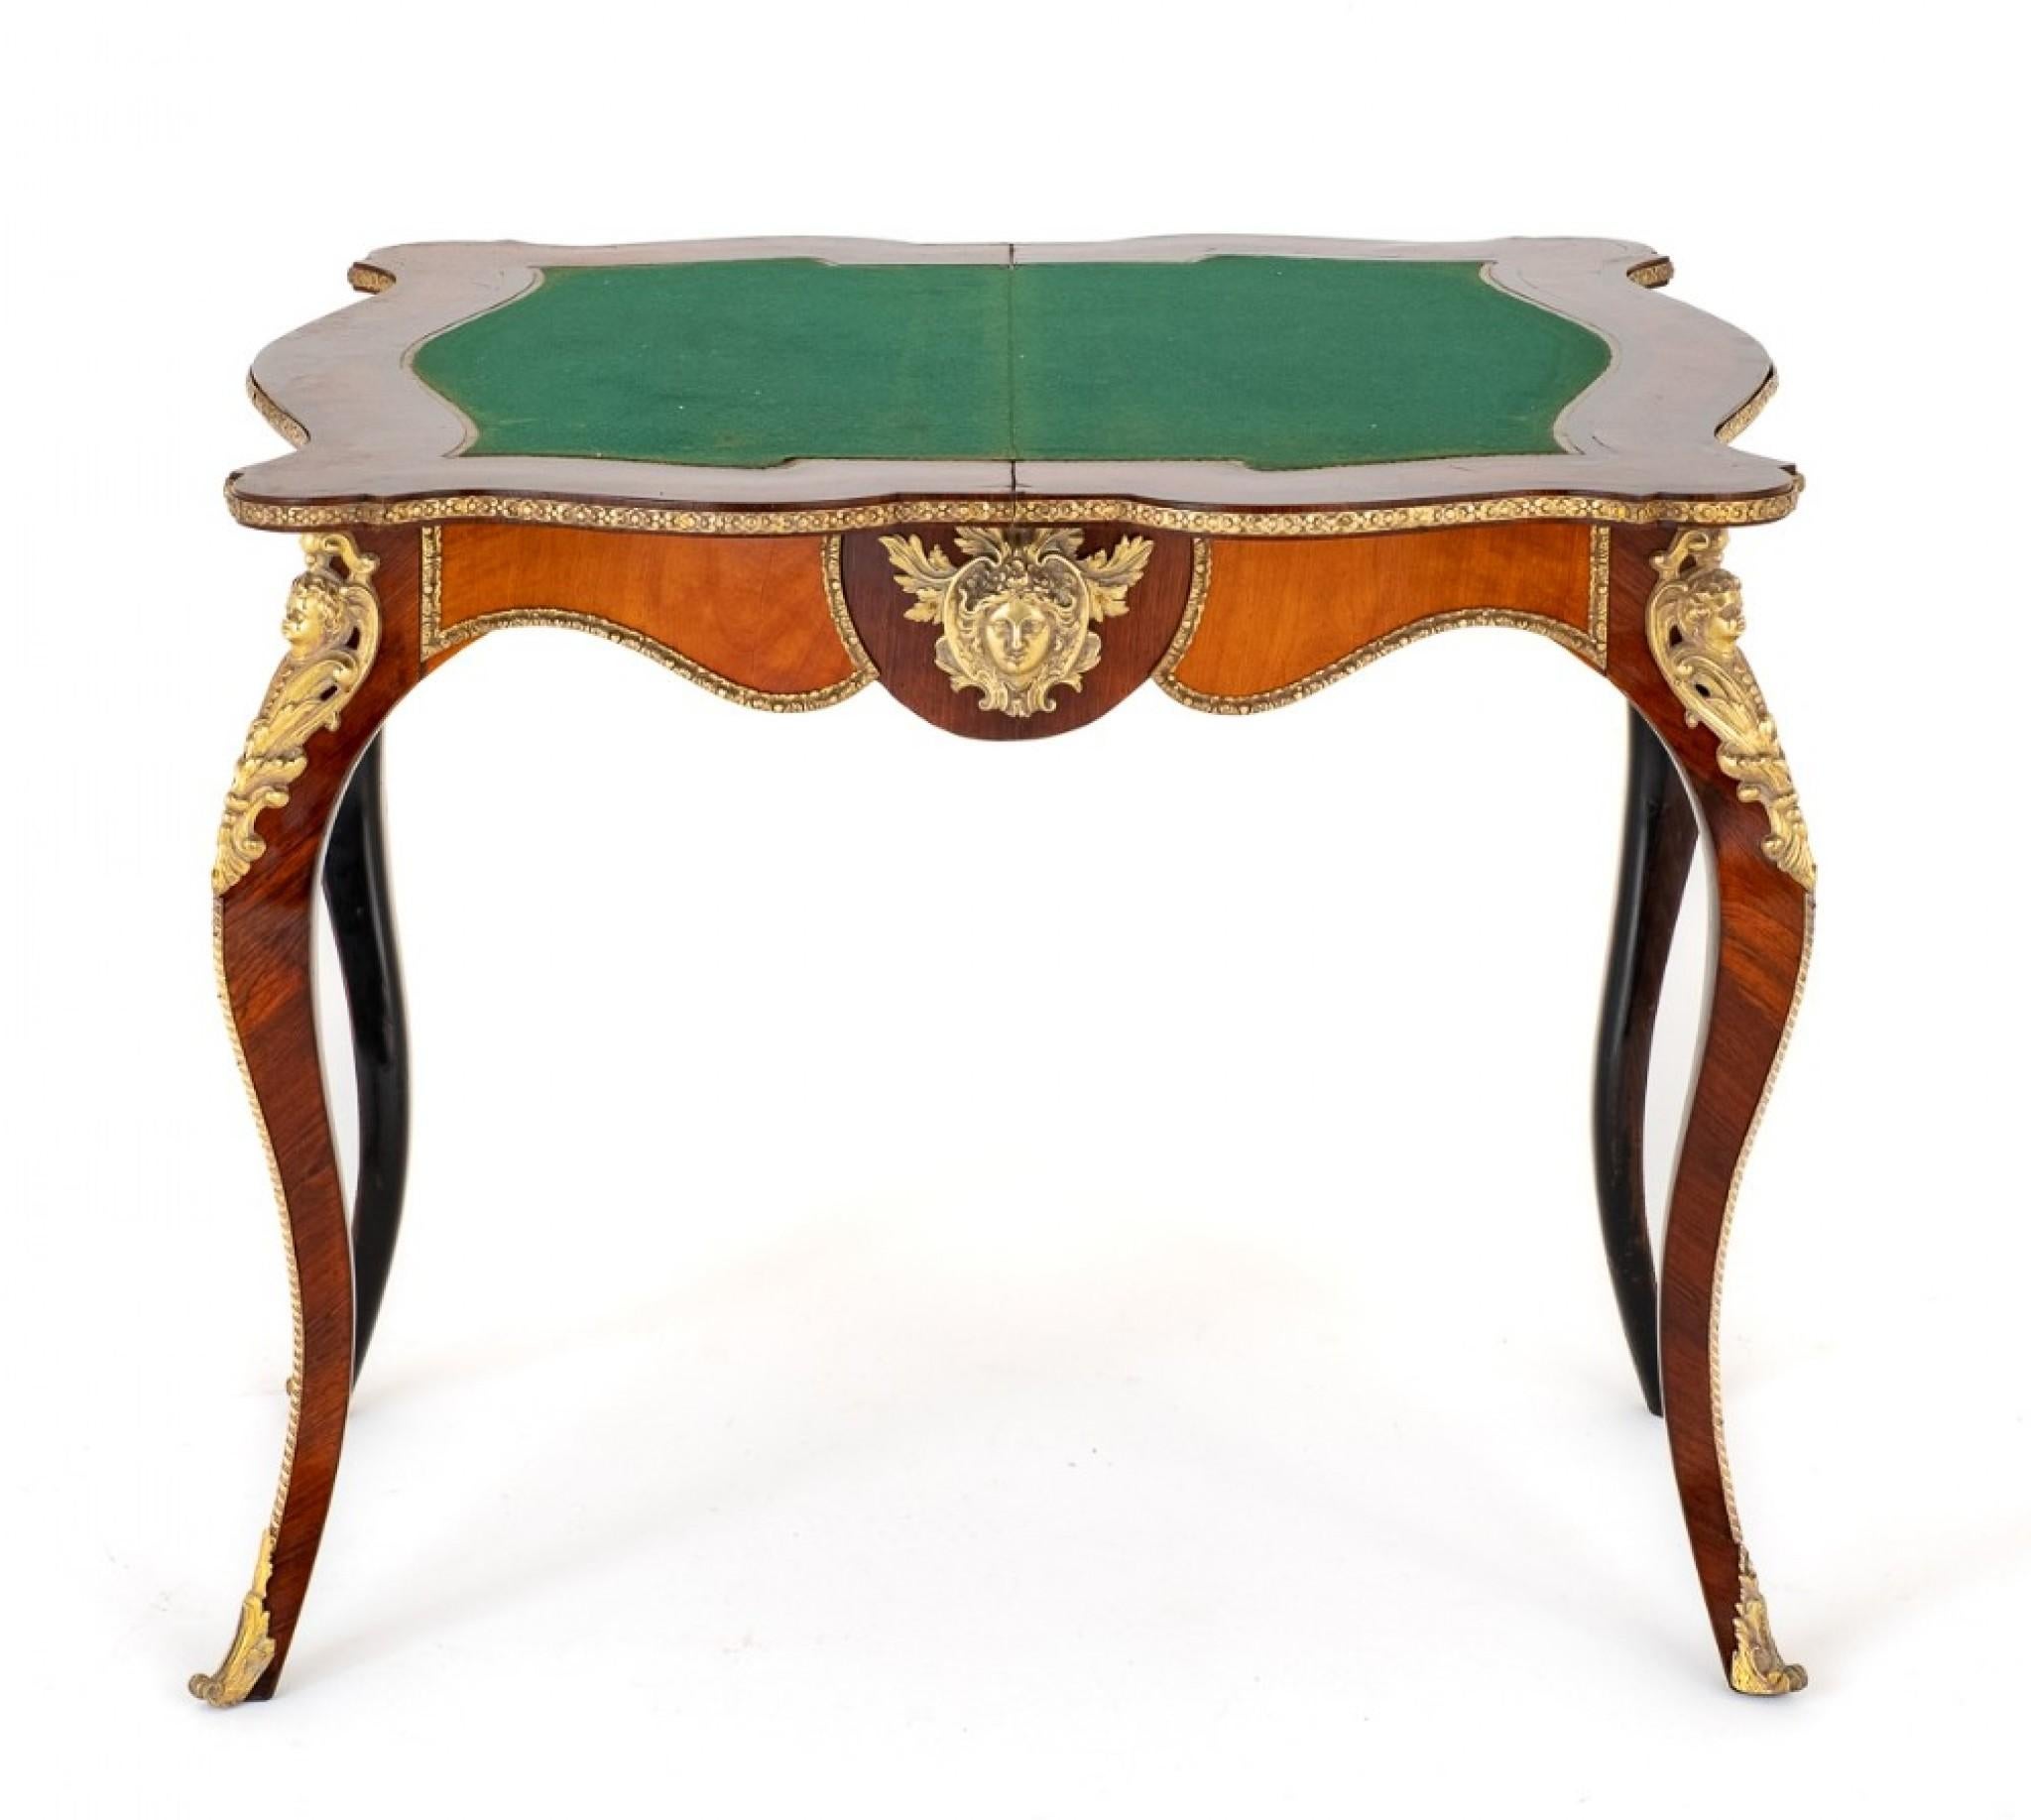 Mahogany French Card Table 1860 Empire Antique Games For Sale